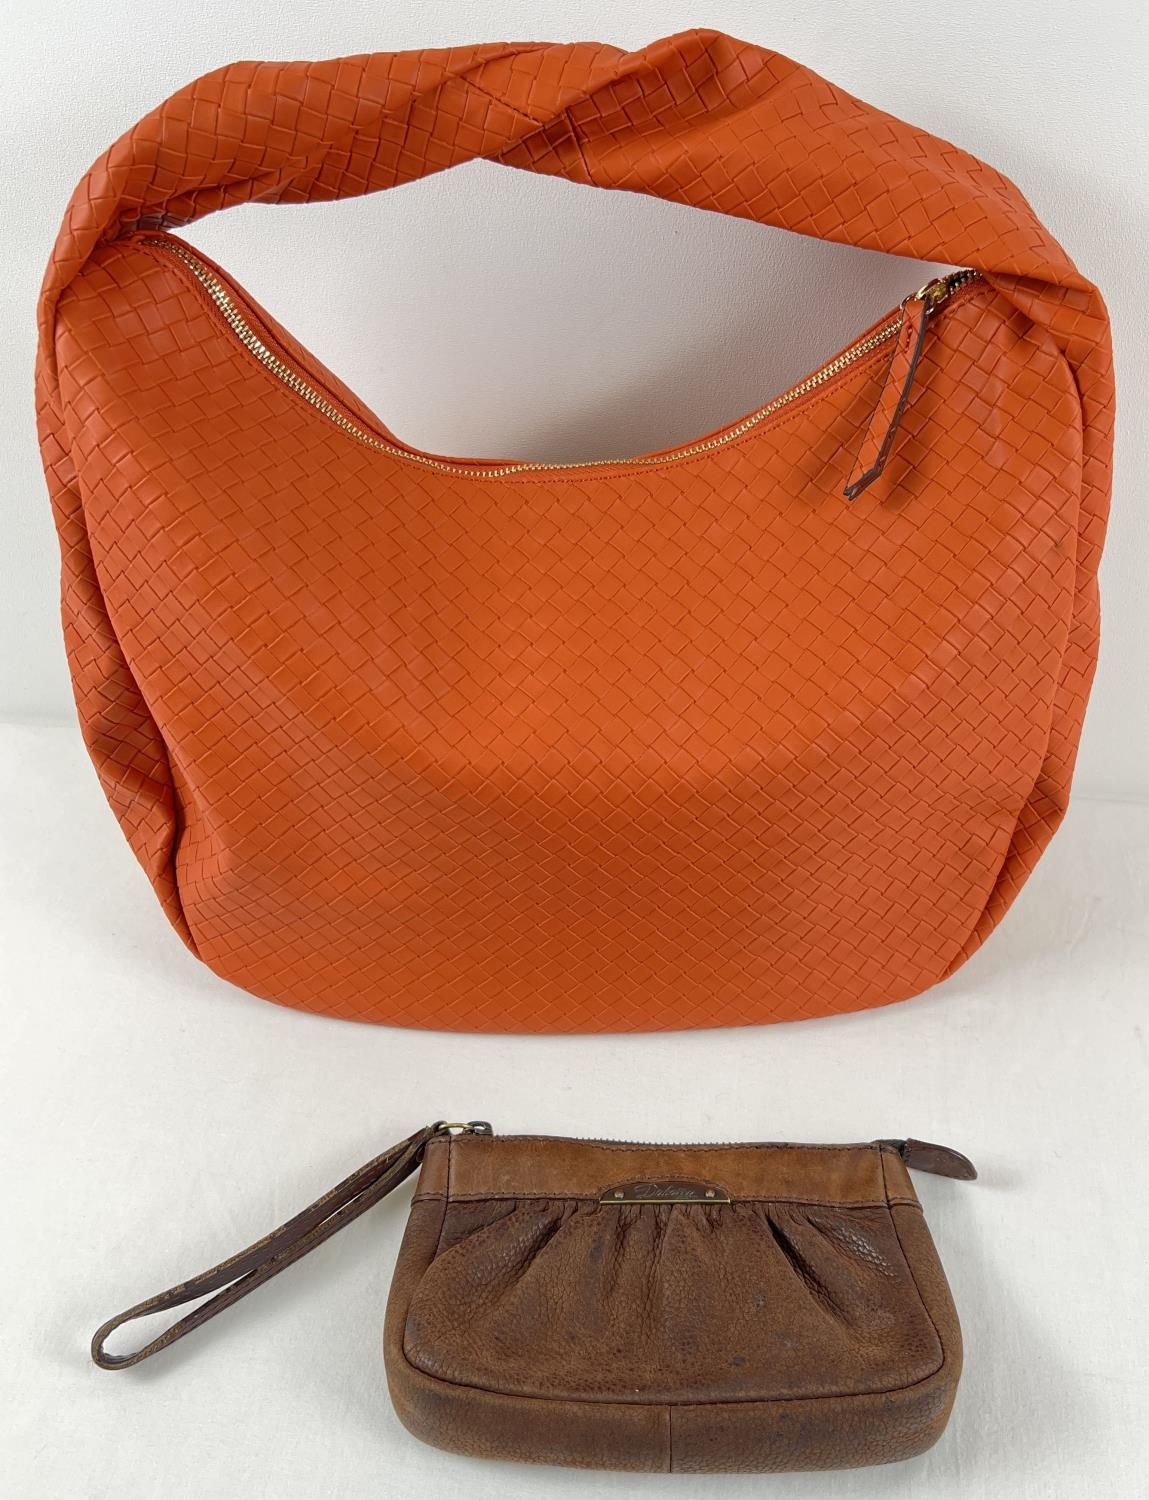 A brown leather wristlet clutch purse by Dubarry, Ireland together with a large orange faux